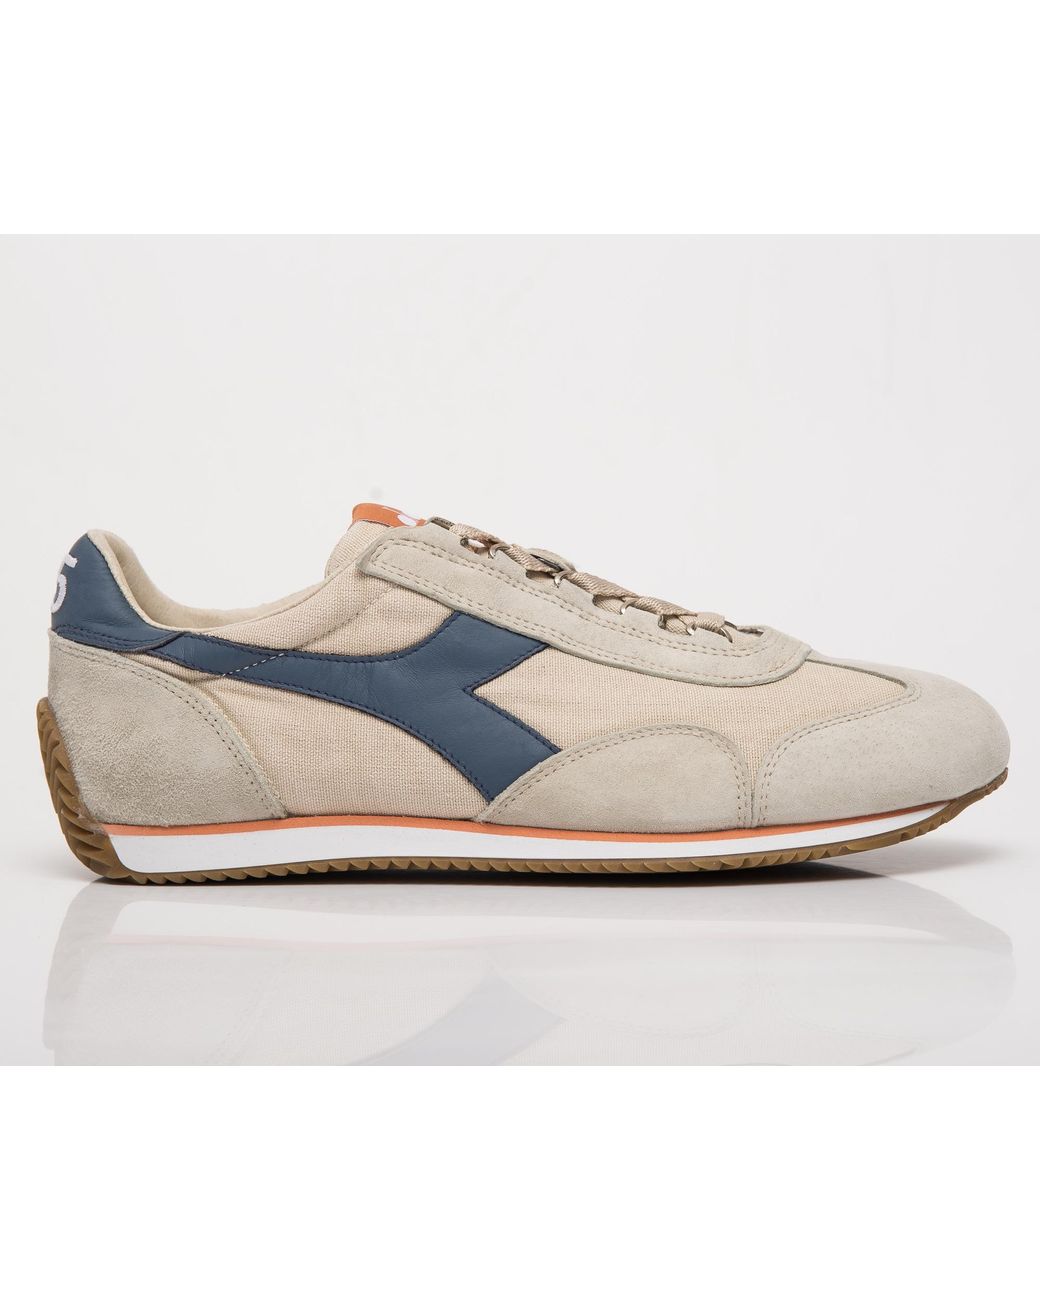 Diadora Heritage Equipe Kidskin Offer Store, 51% OFF | connect-summary.com